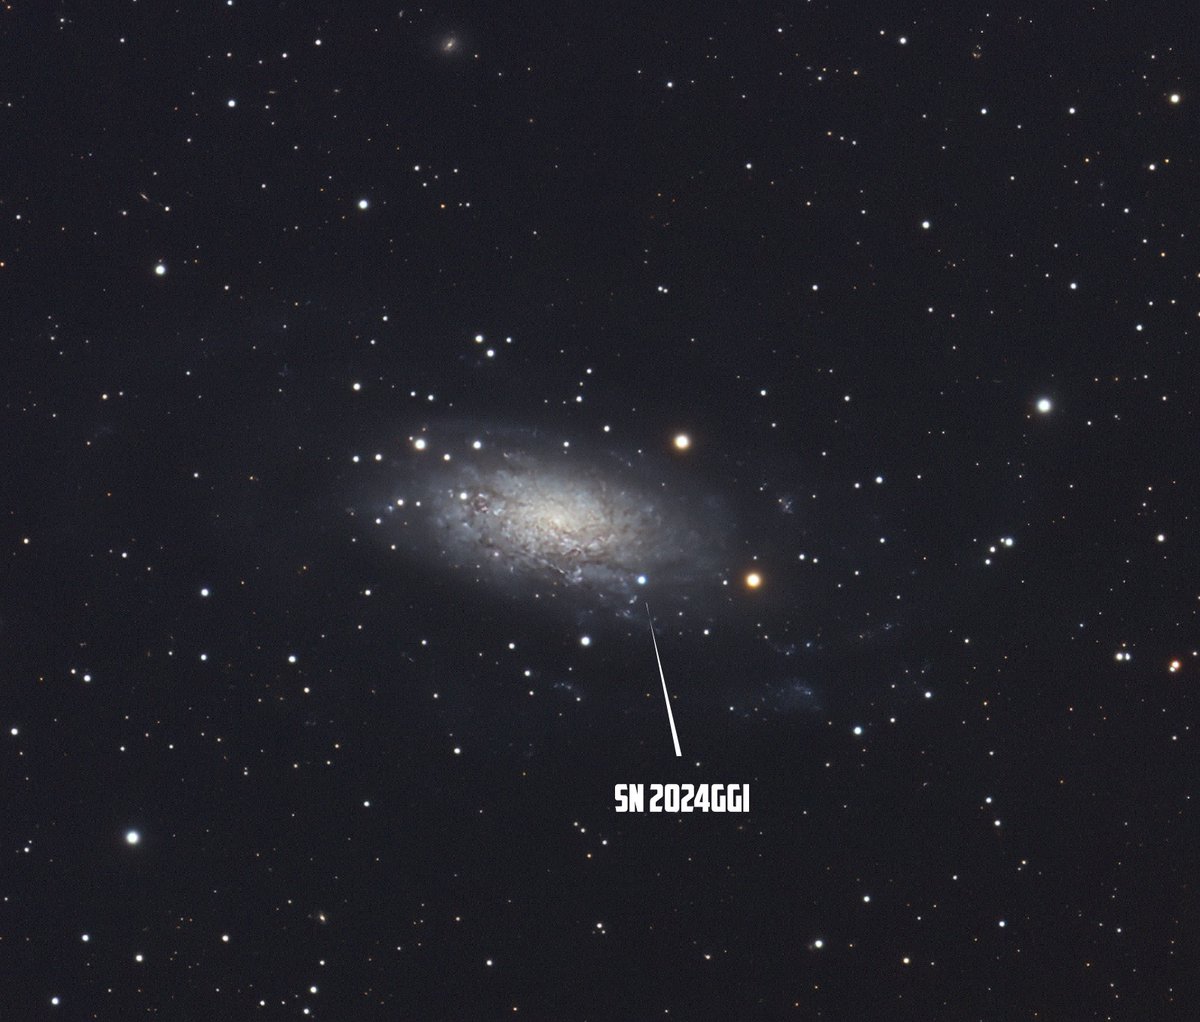 Supernova alert for the Southern Hemisphere astronomers. Fairly new and bright right now, will slowly fade away. Capture the death of a star for a limited time only! ⚰️ #ngc3621 (C11/QHY268M .. 1.5 hours on April 12)